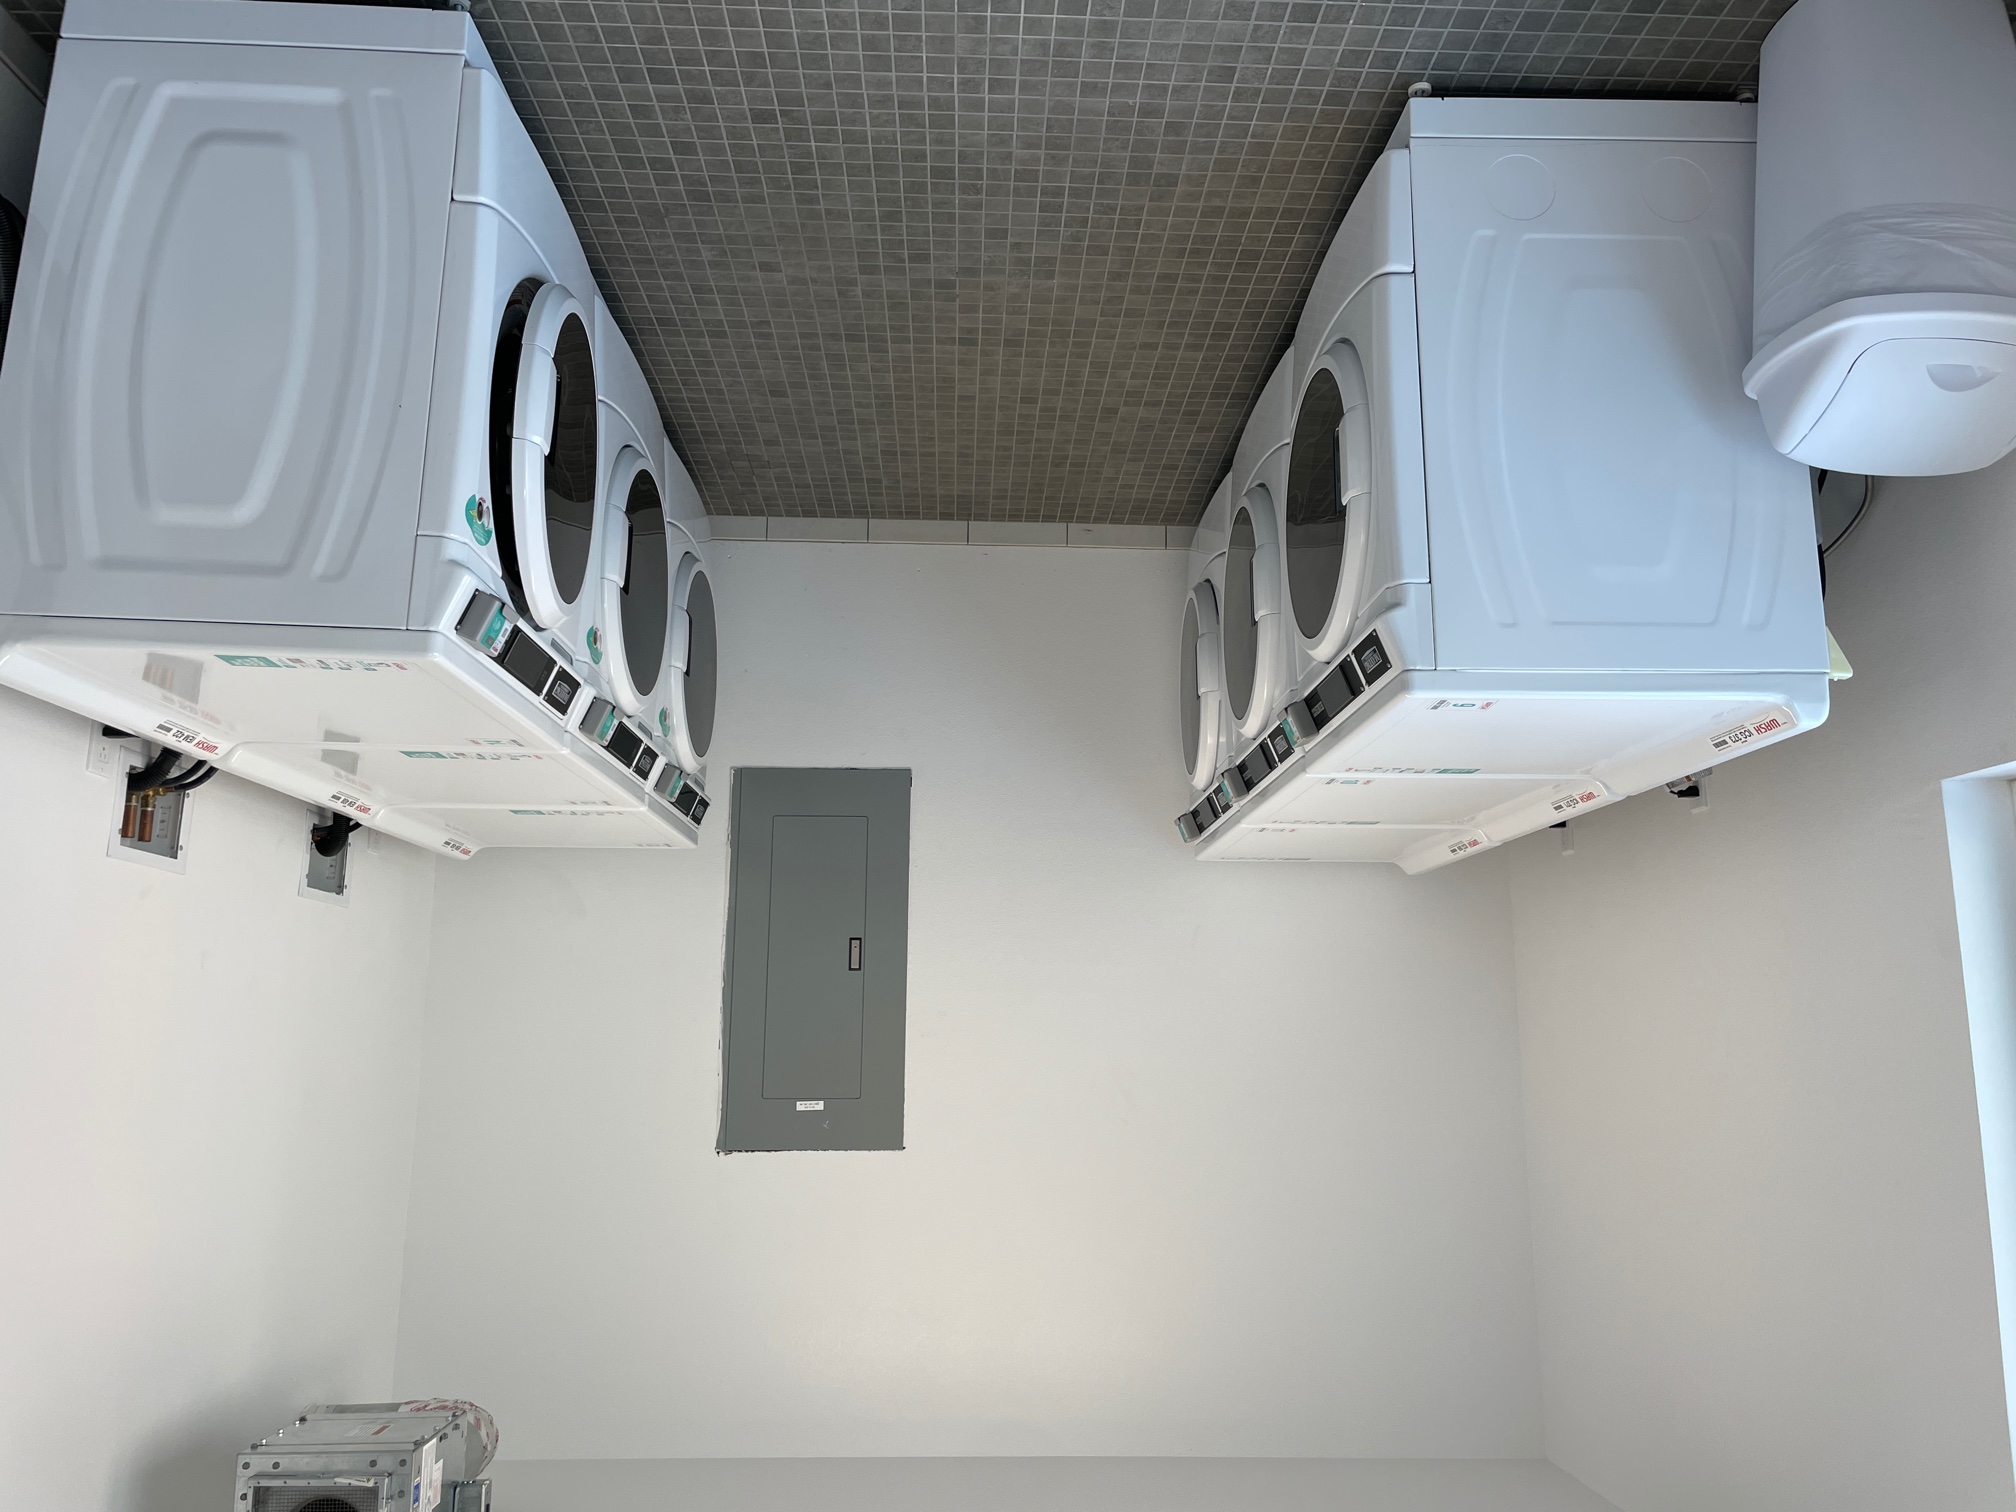 Laundry Rooms - 1st-3rd floors